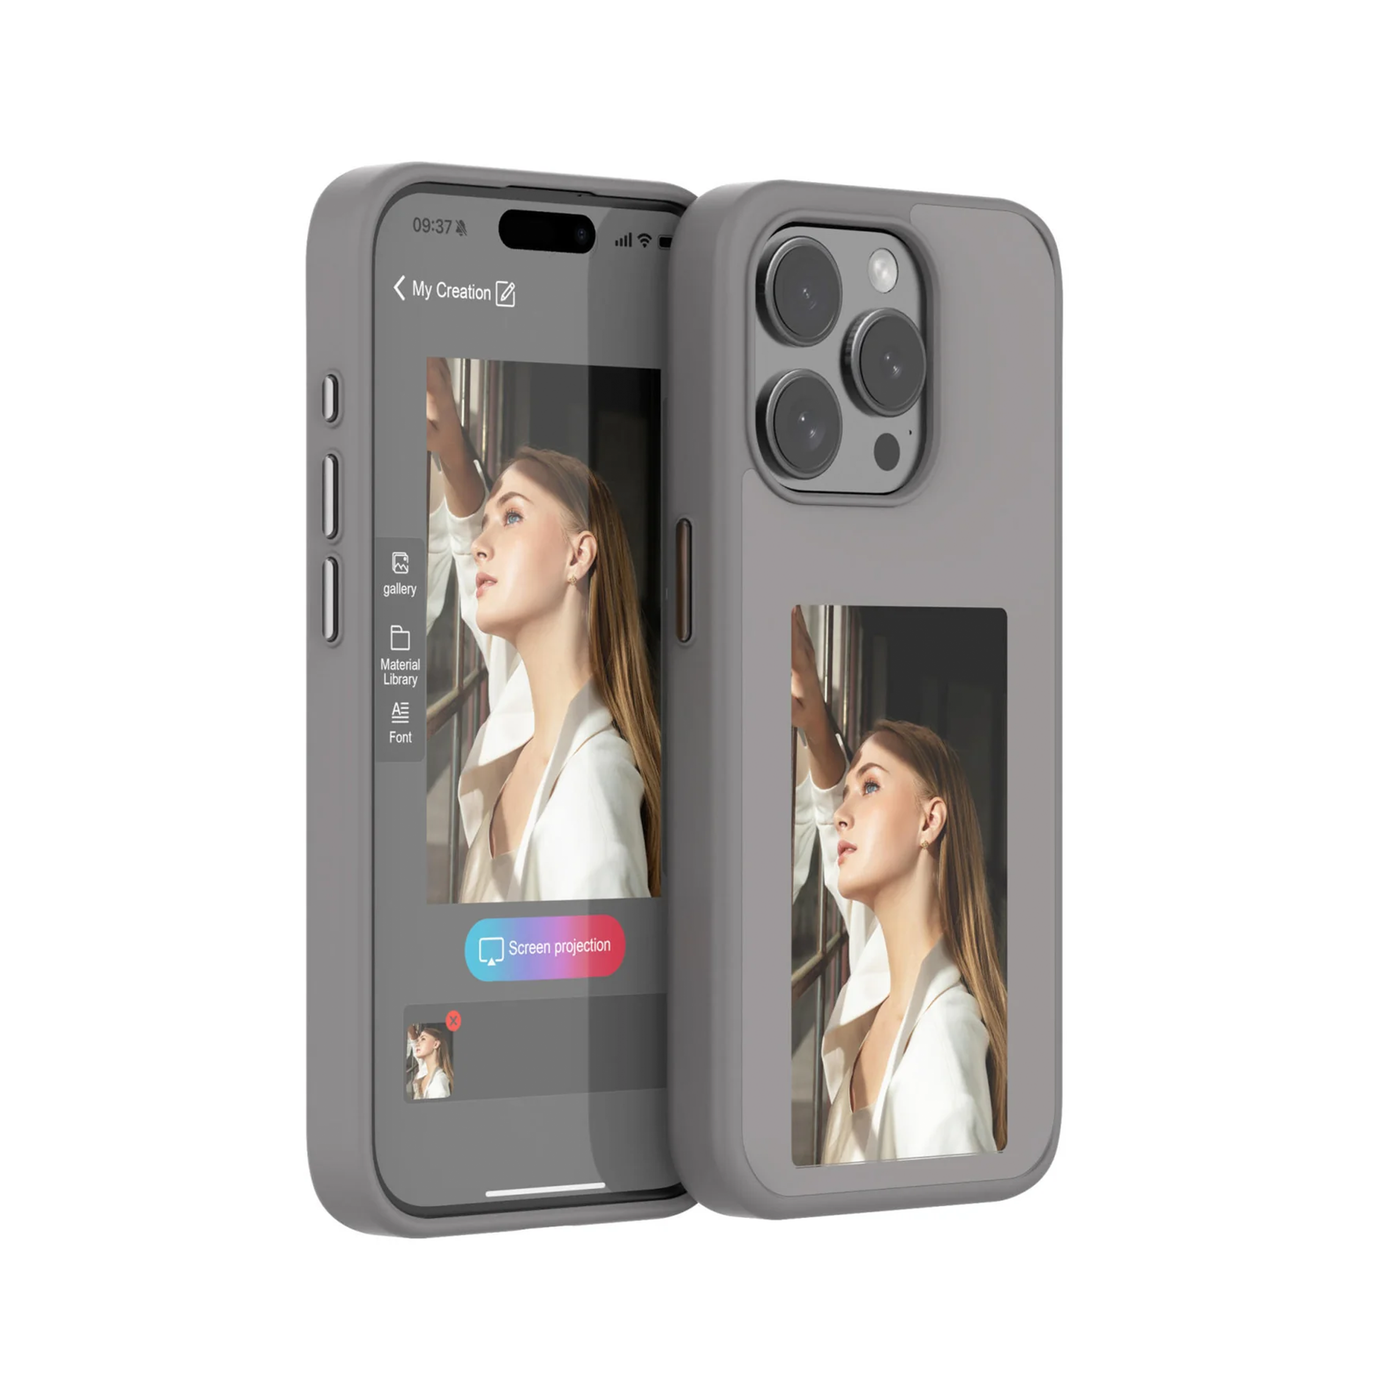 Pixe™ Smart Ink-Screen Case for iPhone